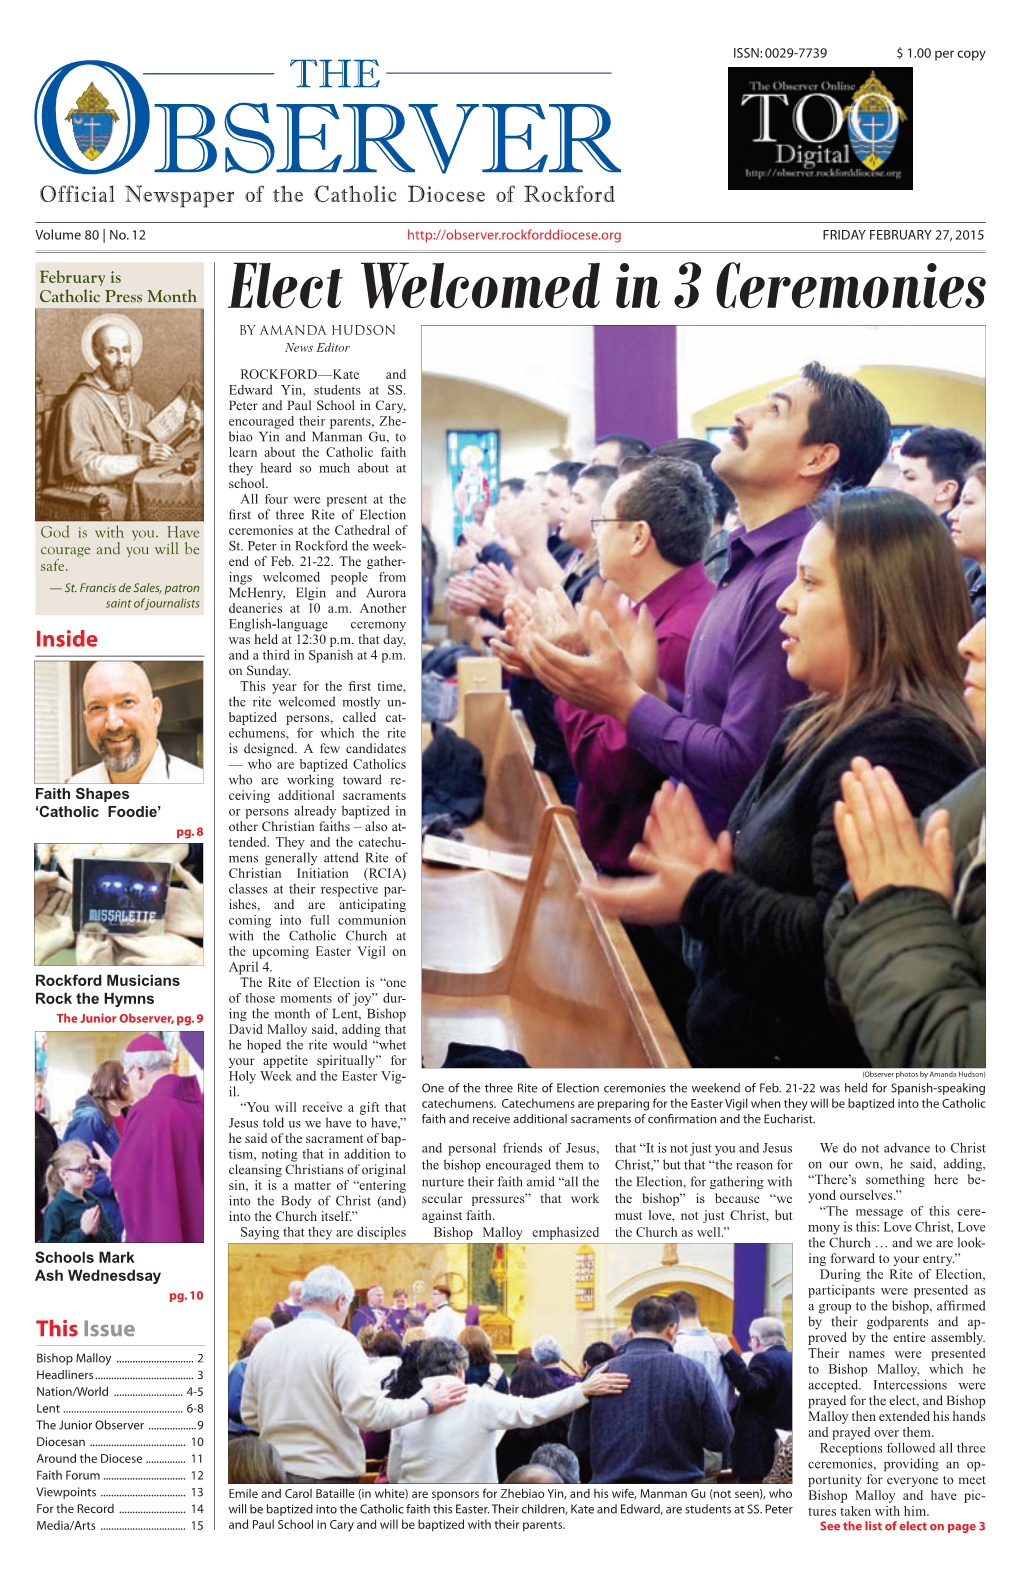 Elect Welcomed in 3 Ceremonies by AMANDA HUDSON News Editor ROCKFORD—Kate and Edward Yin, Students at SS